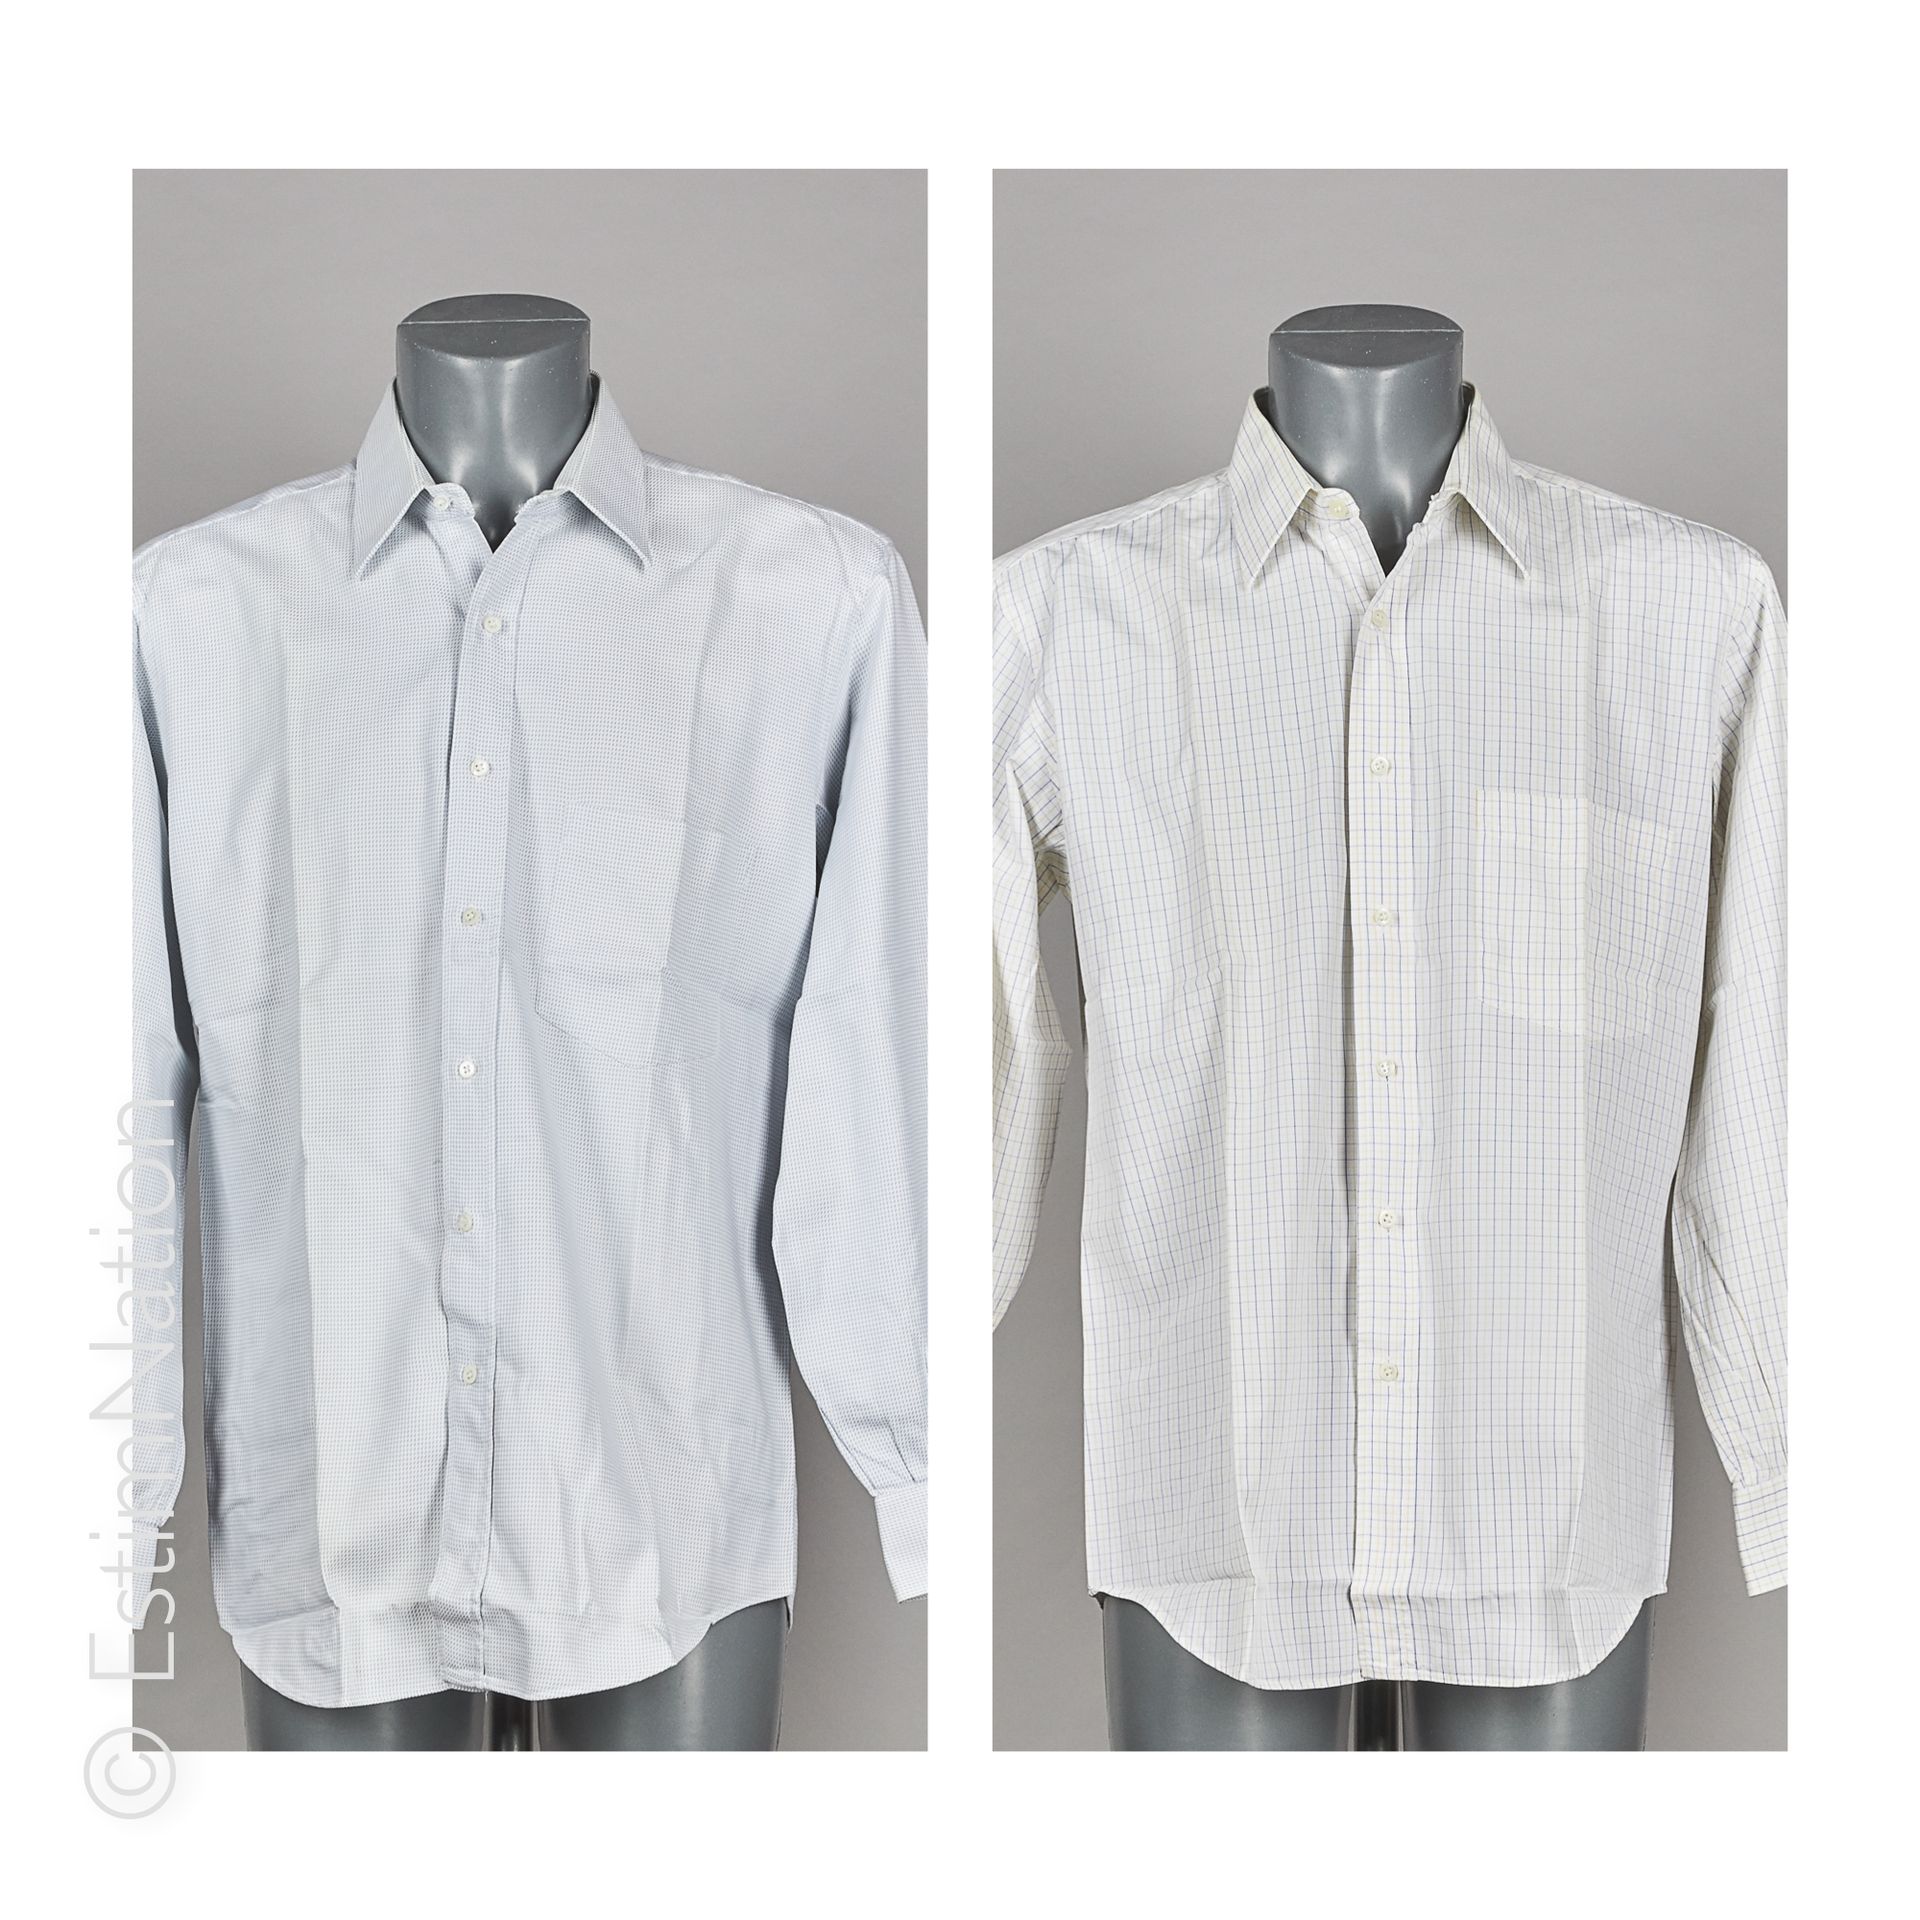 ALAIN FIGARET FOUR striped cotton shirts, blue and white (S 17/44, S 43, S 41) (&hellip;